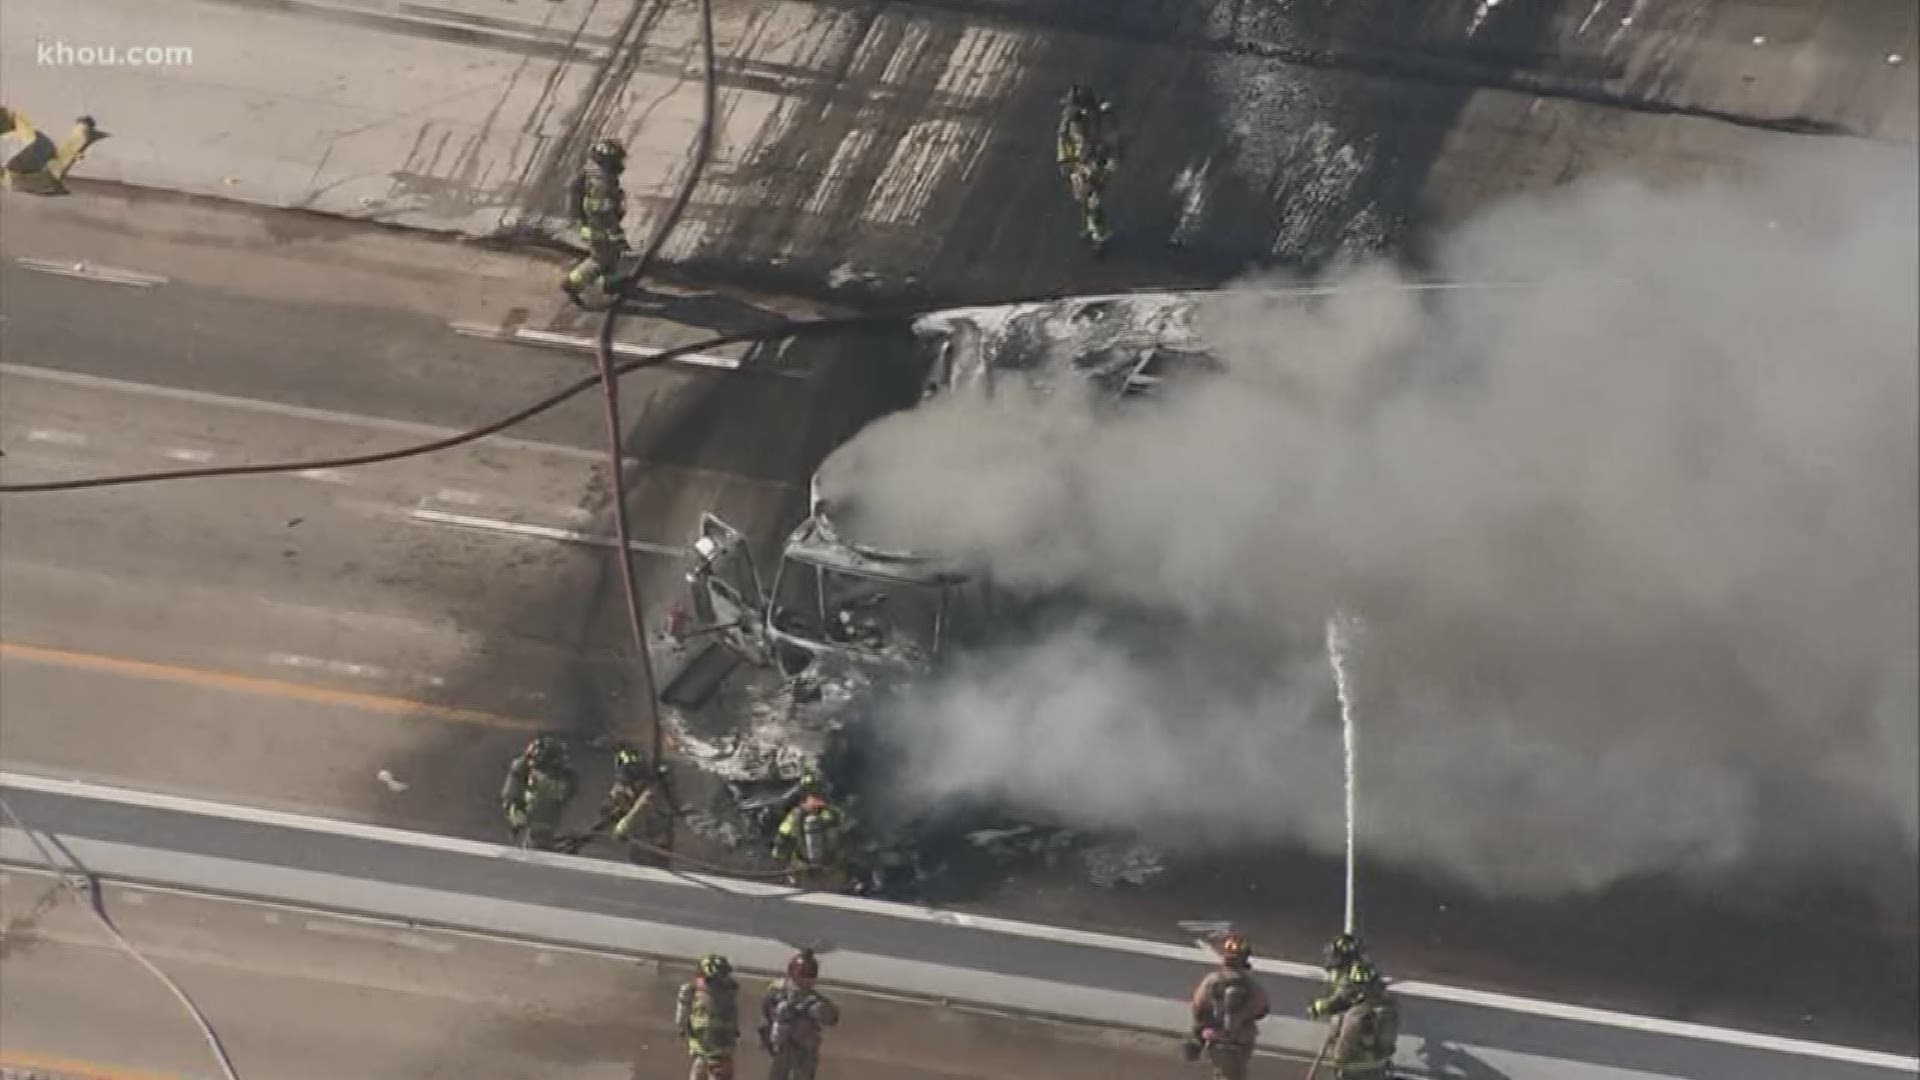 Beltway 8-South was shut down heading east at Highway 288 due to an earlier truck crash and fire that also burned a boat.